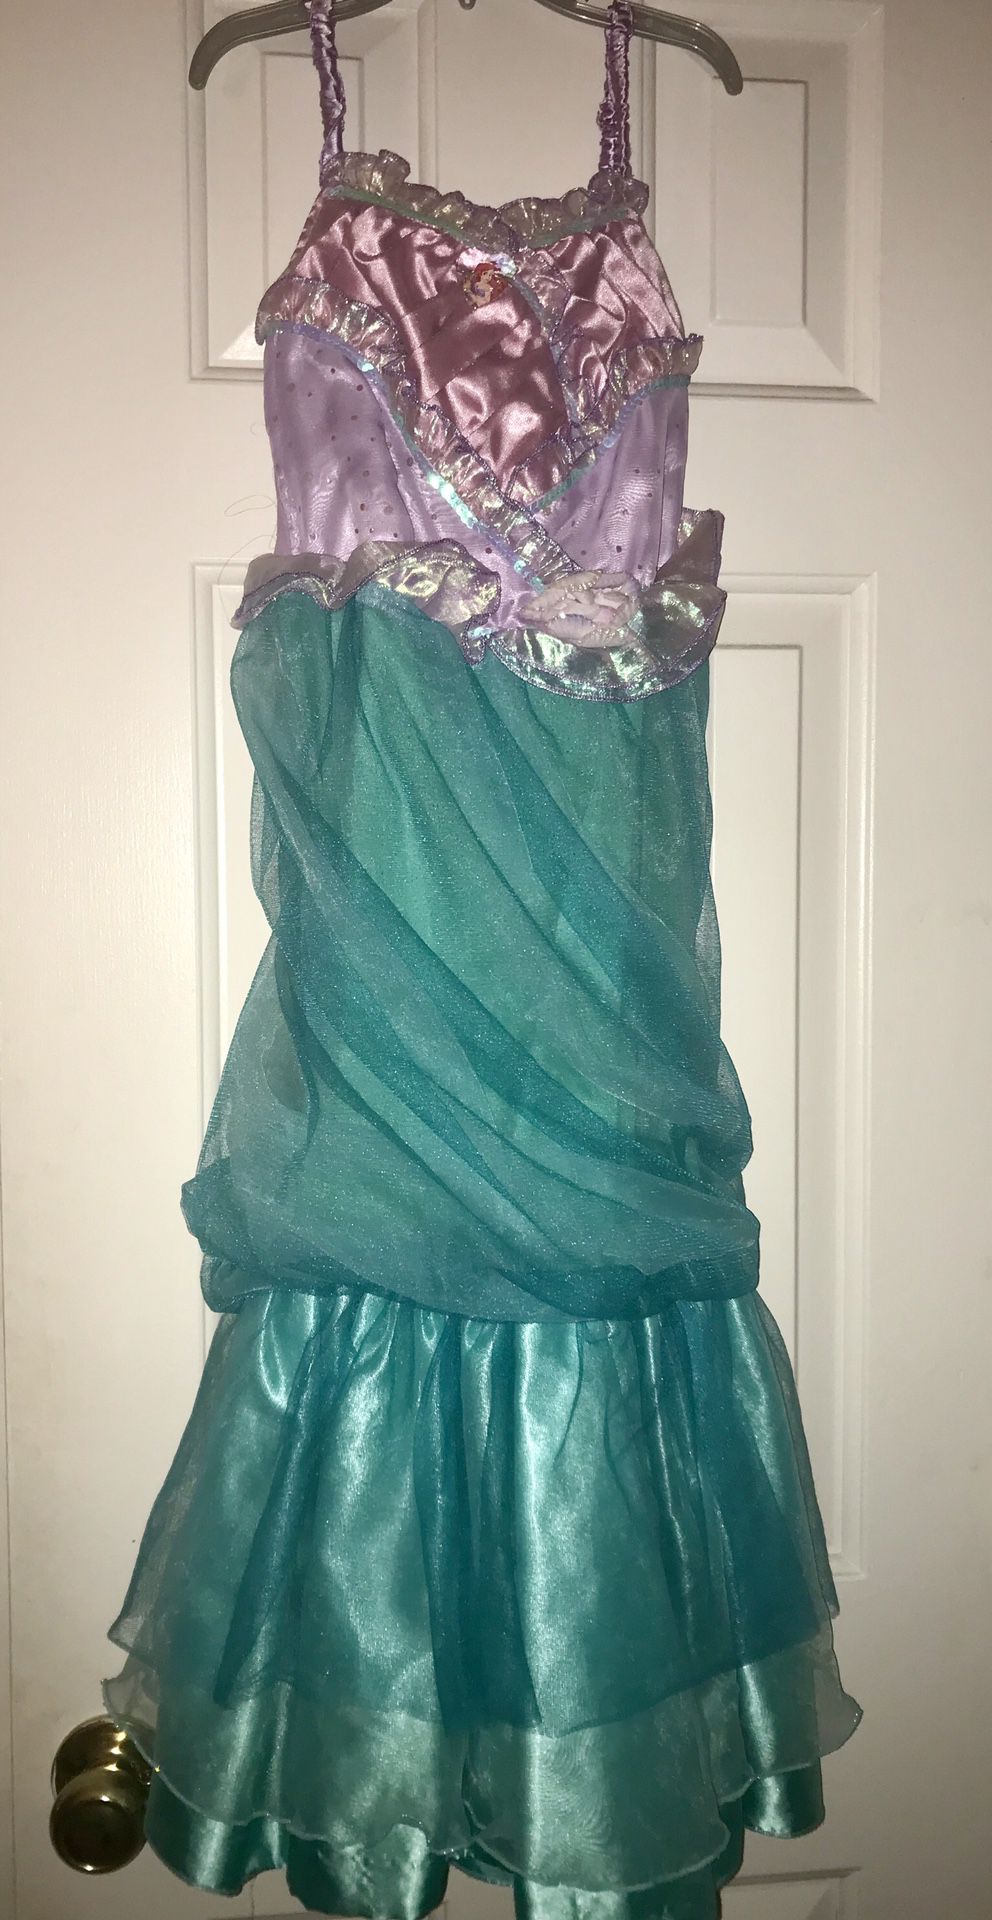 The little mermaid Costume size: M 7/8